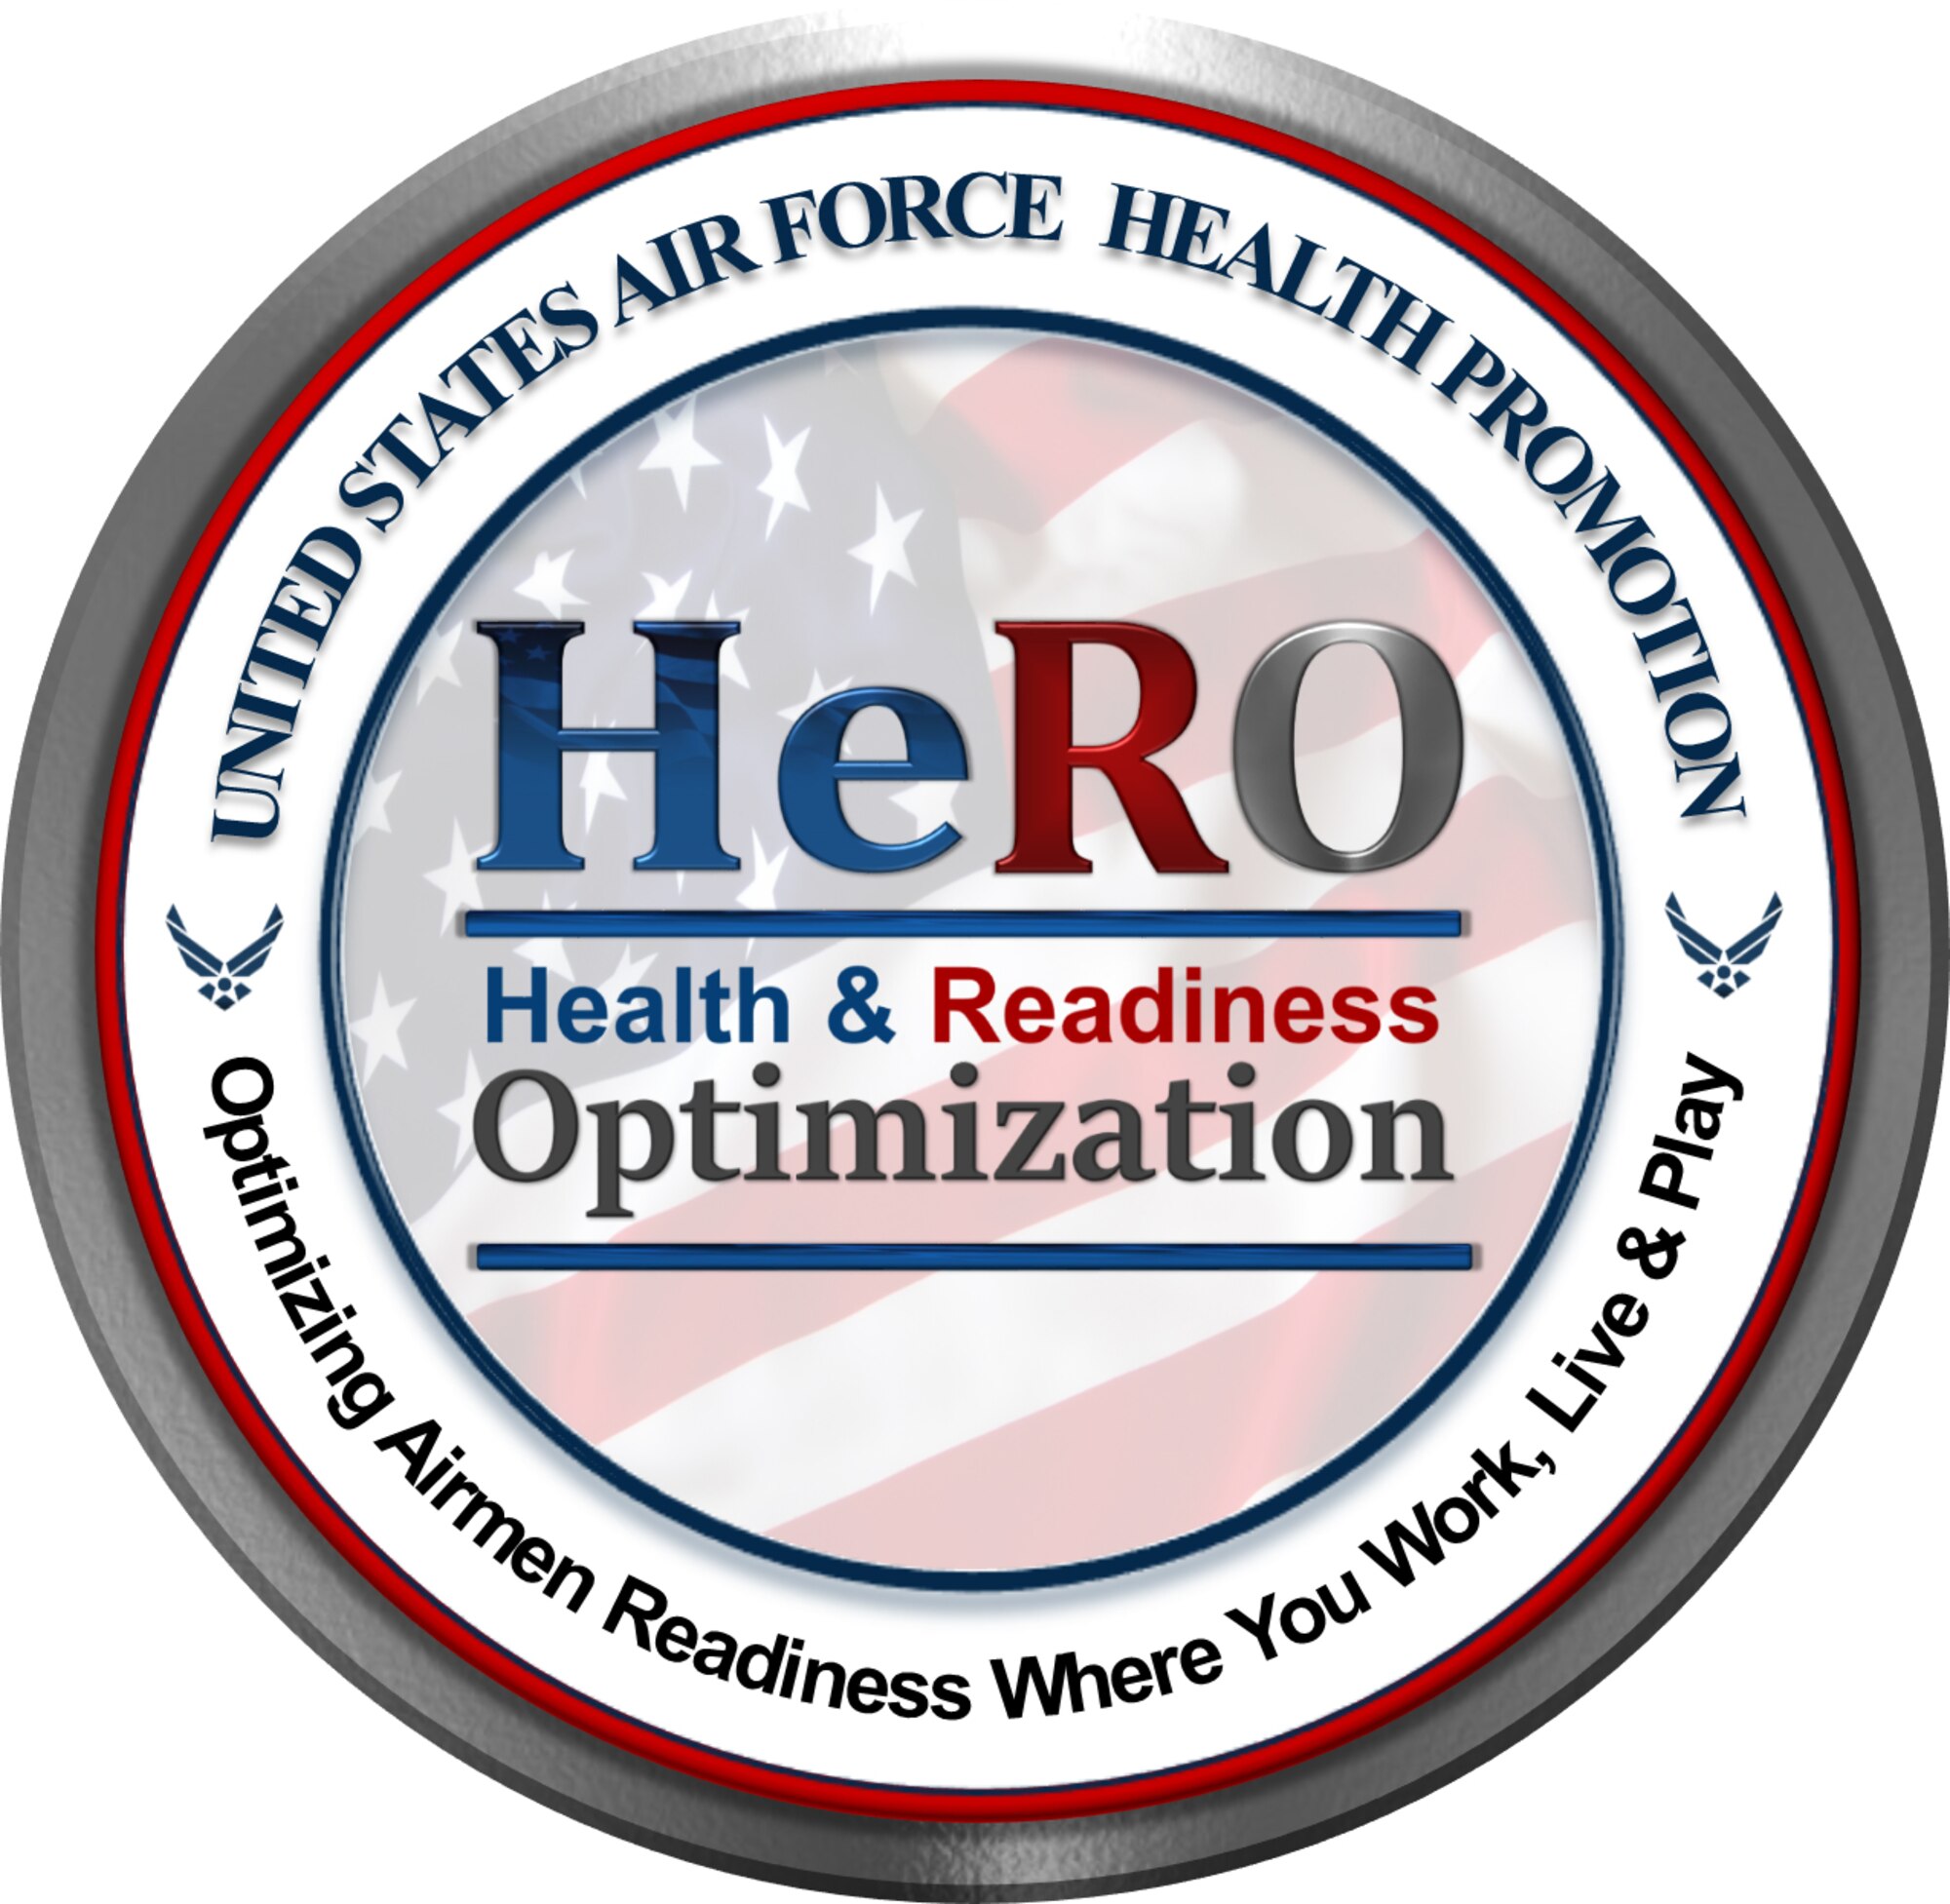 Operation Health and Readiness Optimization, or Operation HeRO, is a new Air Force Health Promotion initiative that is being implemented this fall by the 55th Medical Group’s Health Promotion Office at Offutt Air Force Base, Nebraska. 

Operation HeRO is intended to improve the health and readiness of Airmen by bringing initiatives to them in their unit work centers that help them solve personal challenges.